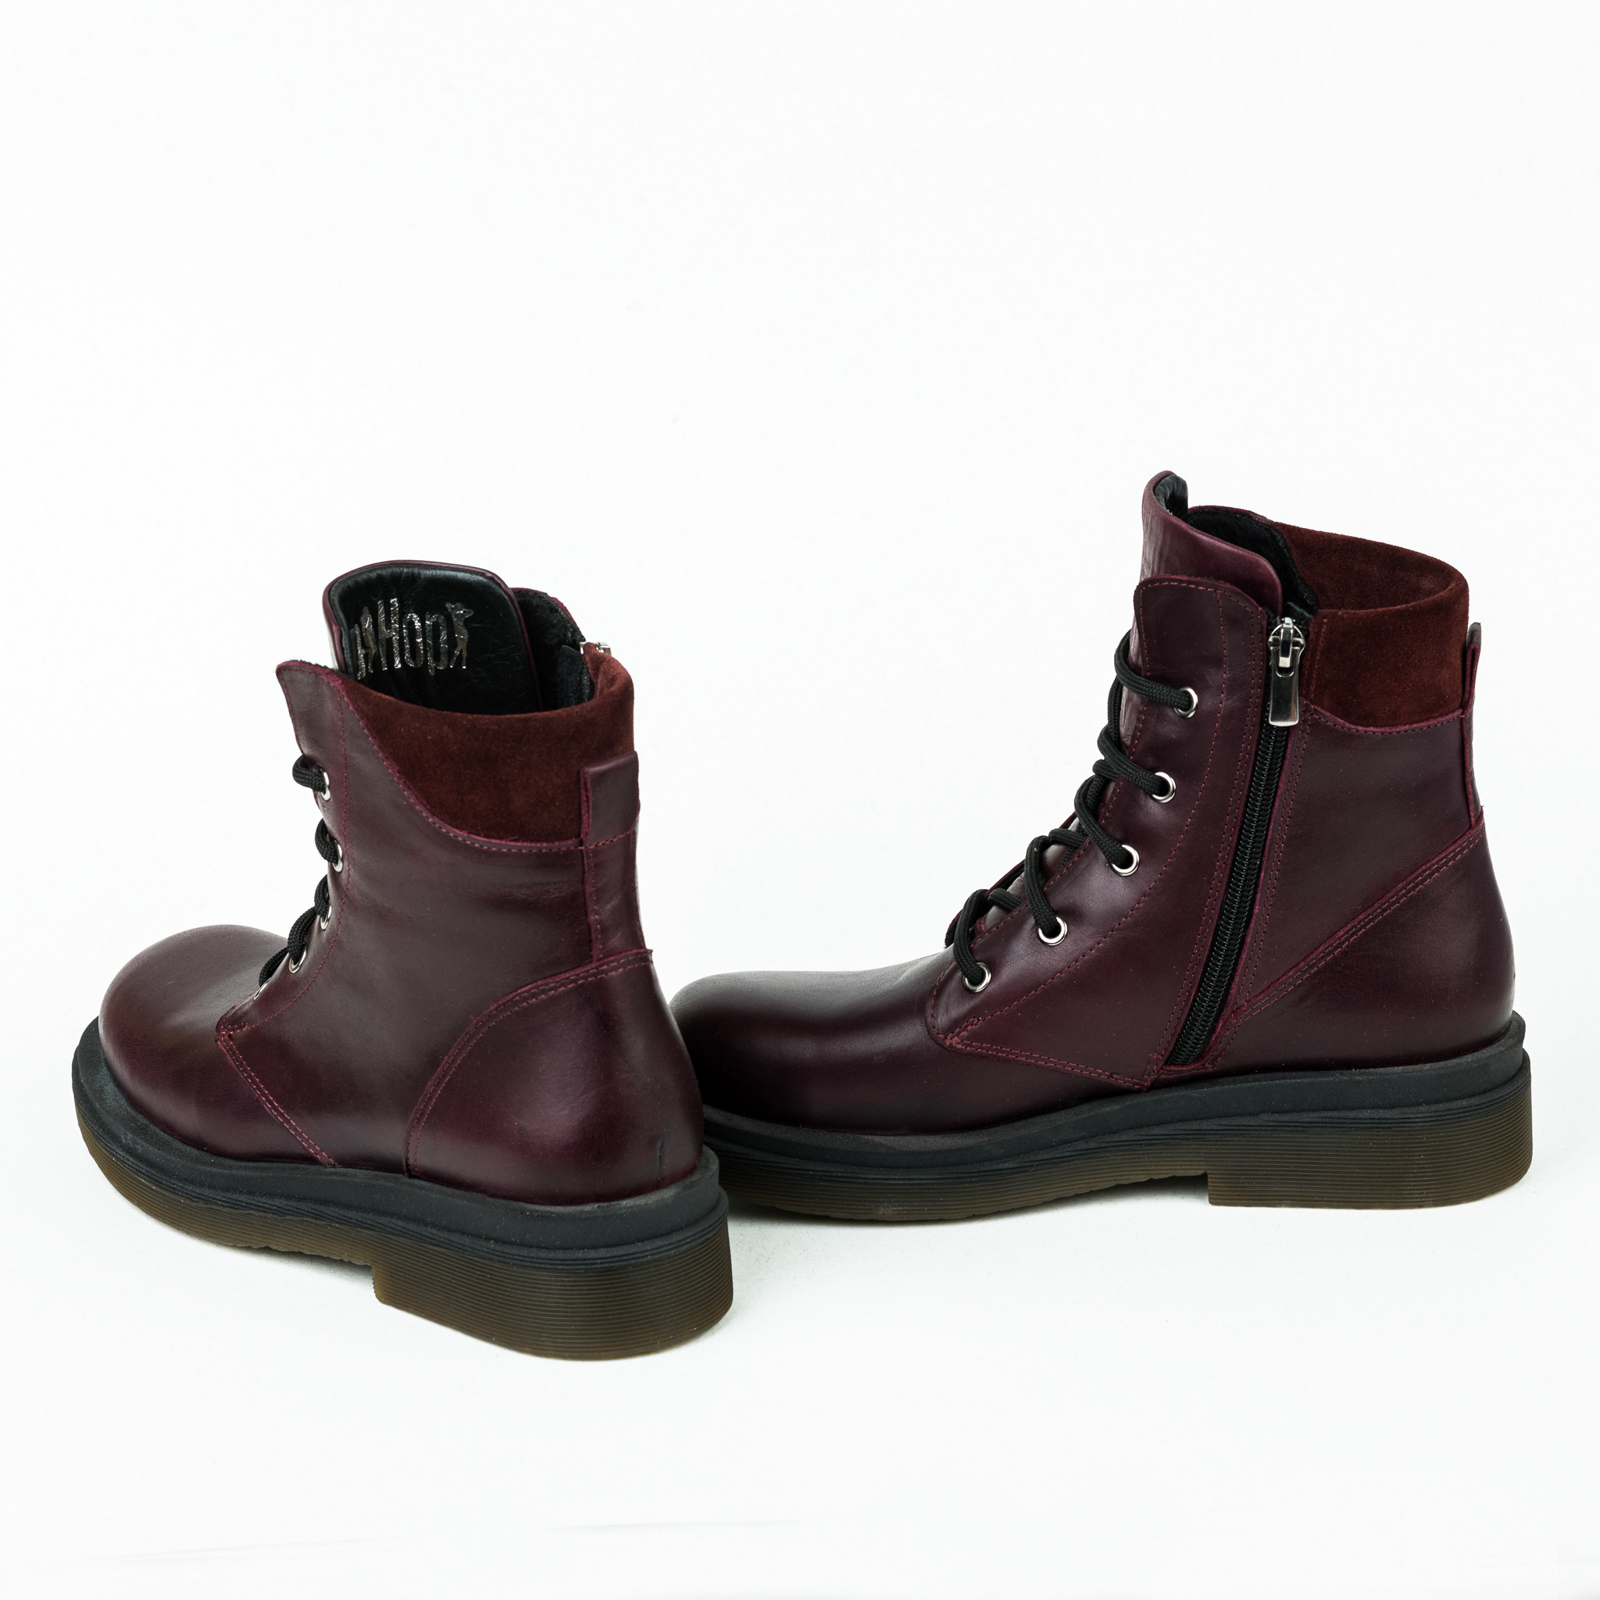 Leather ankle boots B059 - WINE RED